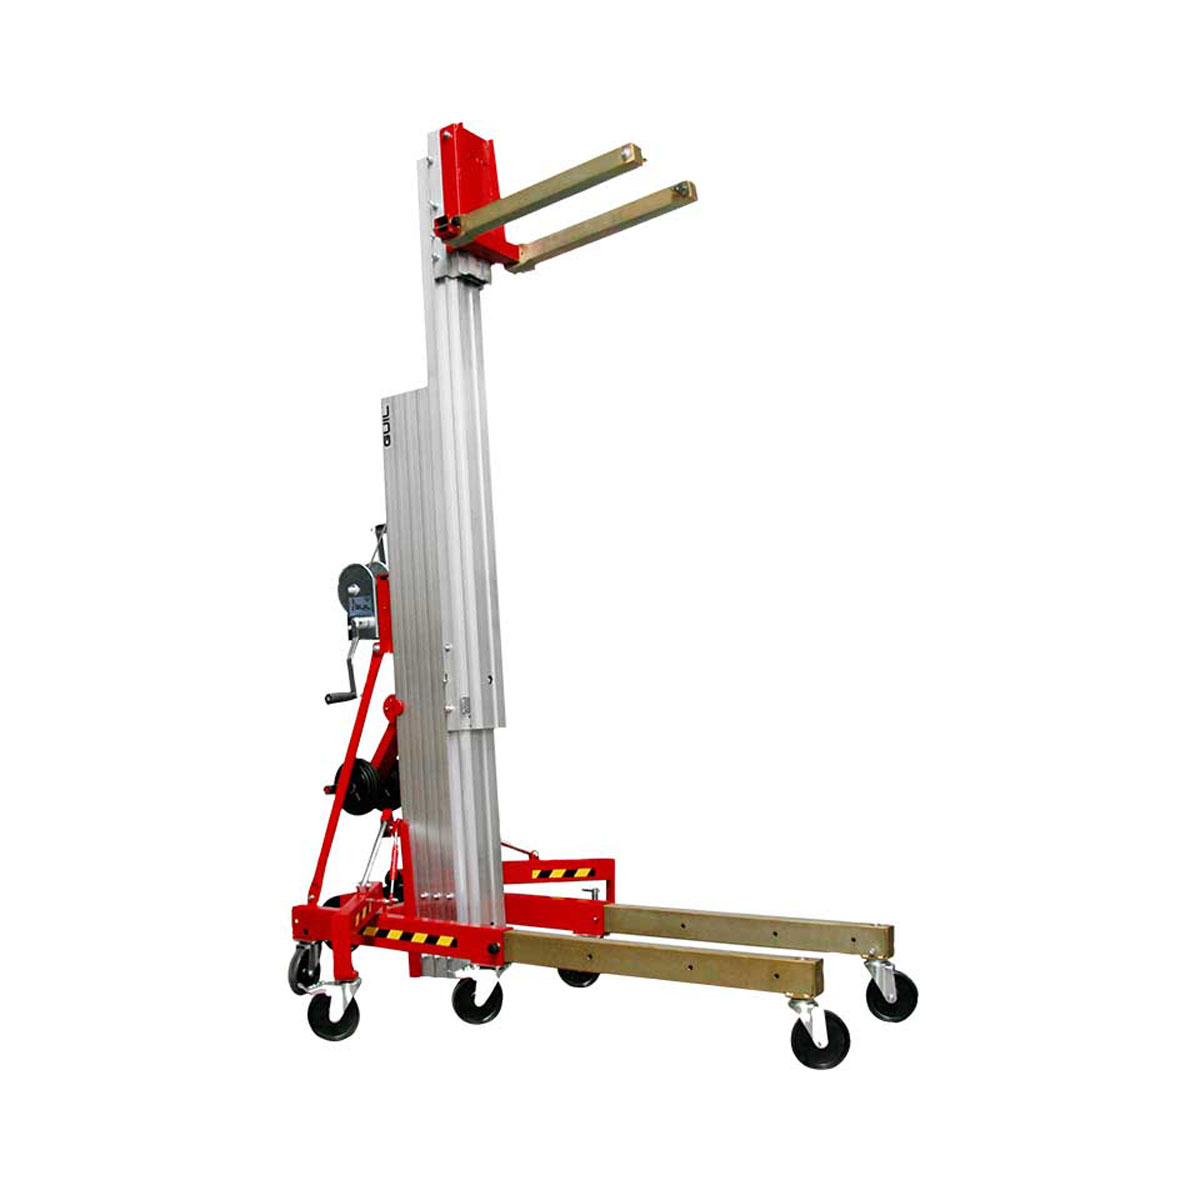 Buy Material Lifter w Auto Brake in Utility Lifters | Materials Handling Lift Towers from GUIL available at Astrolift NZ